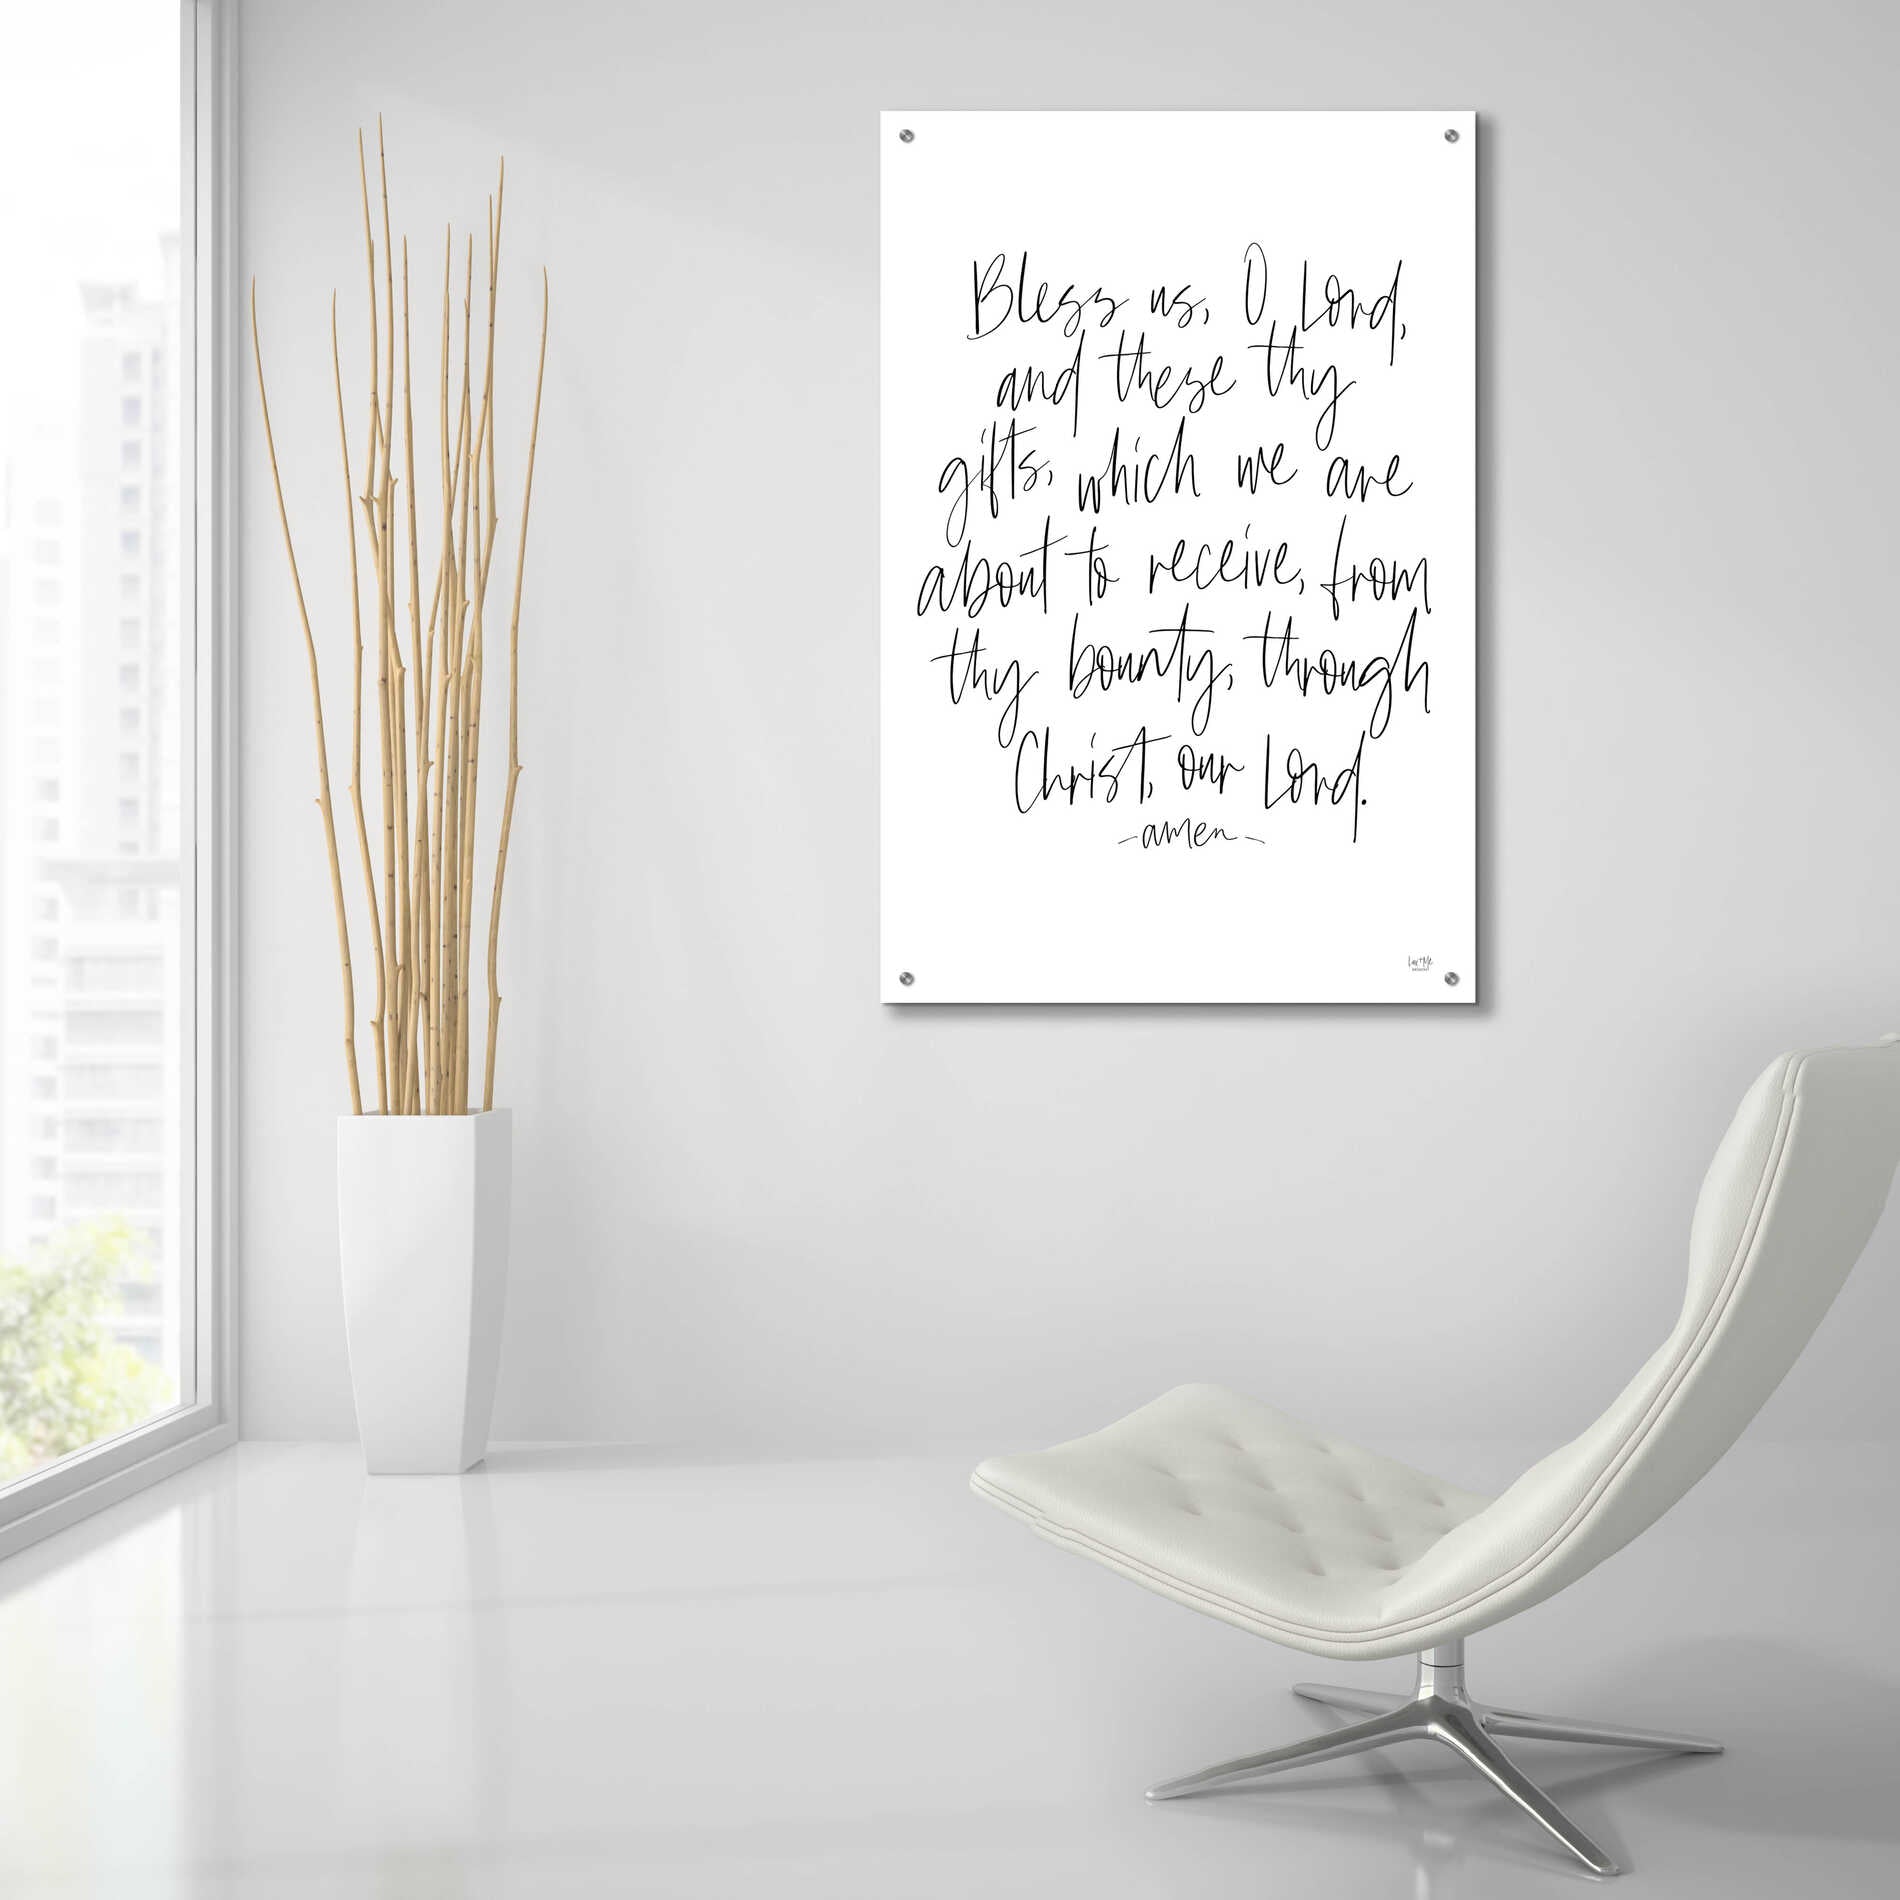 Epic Art 'Bless Us on White' by Lux + Me Designs, Acrylic Glass Wall Art,24x36